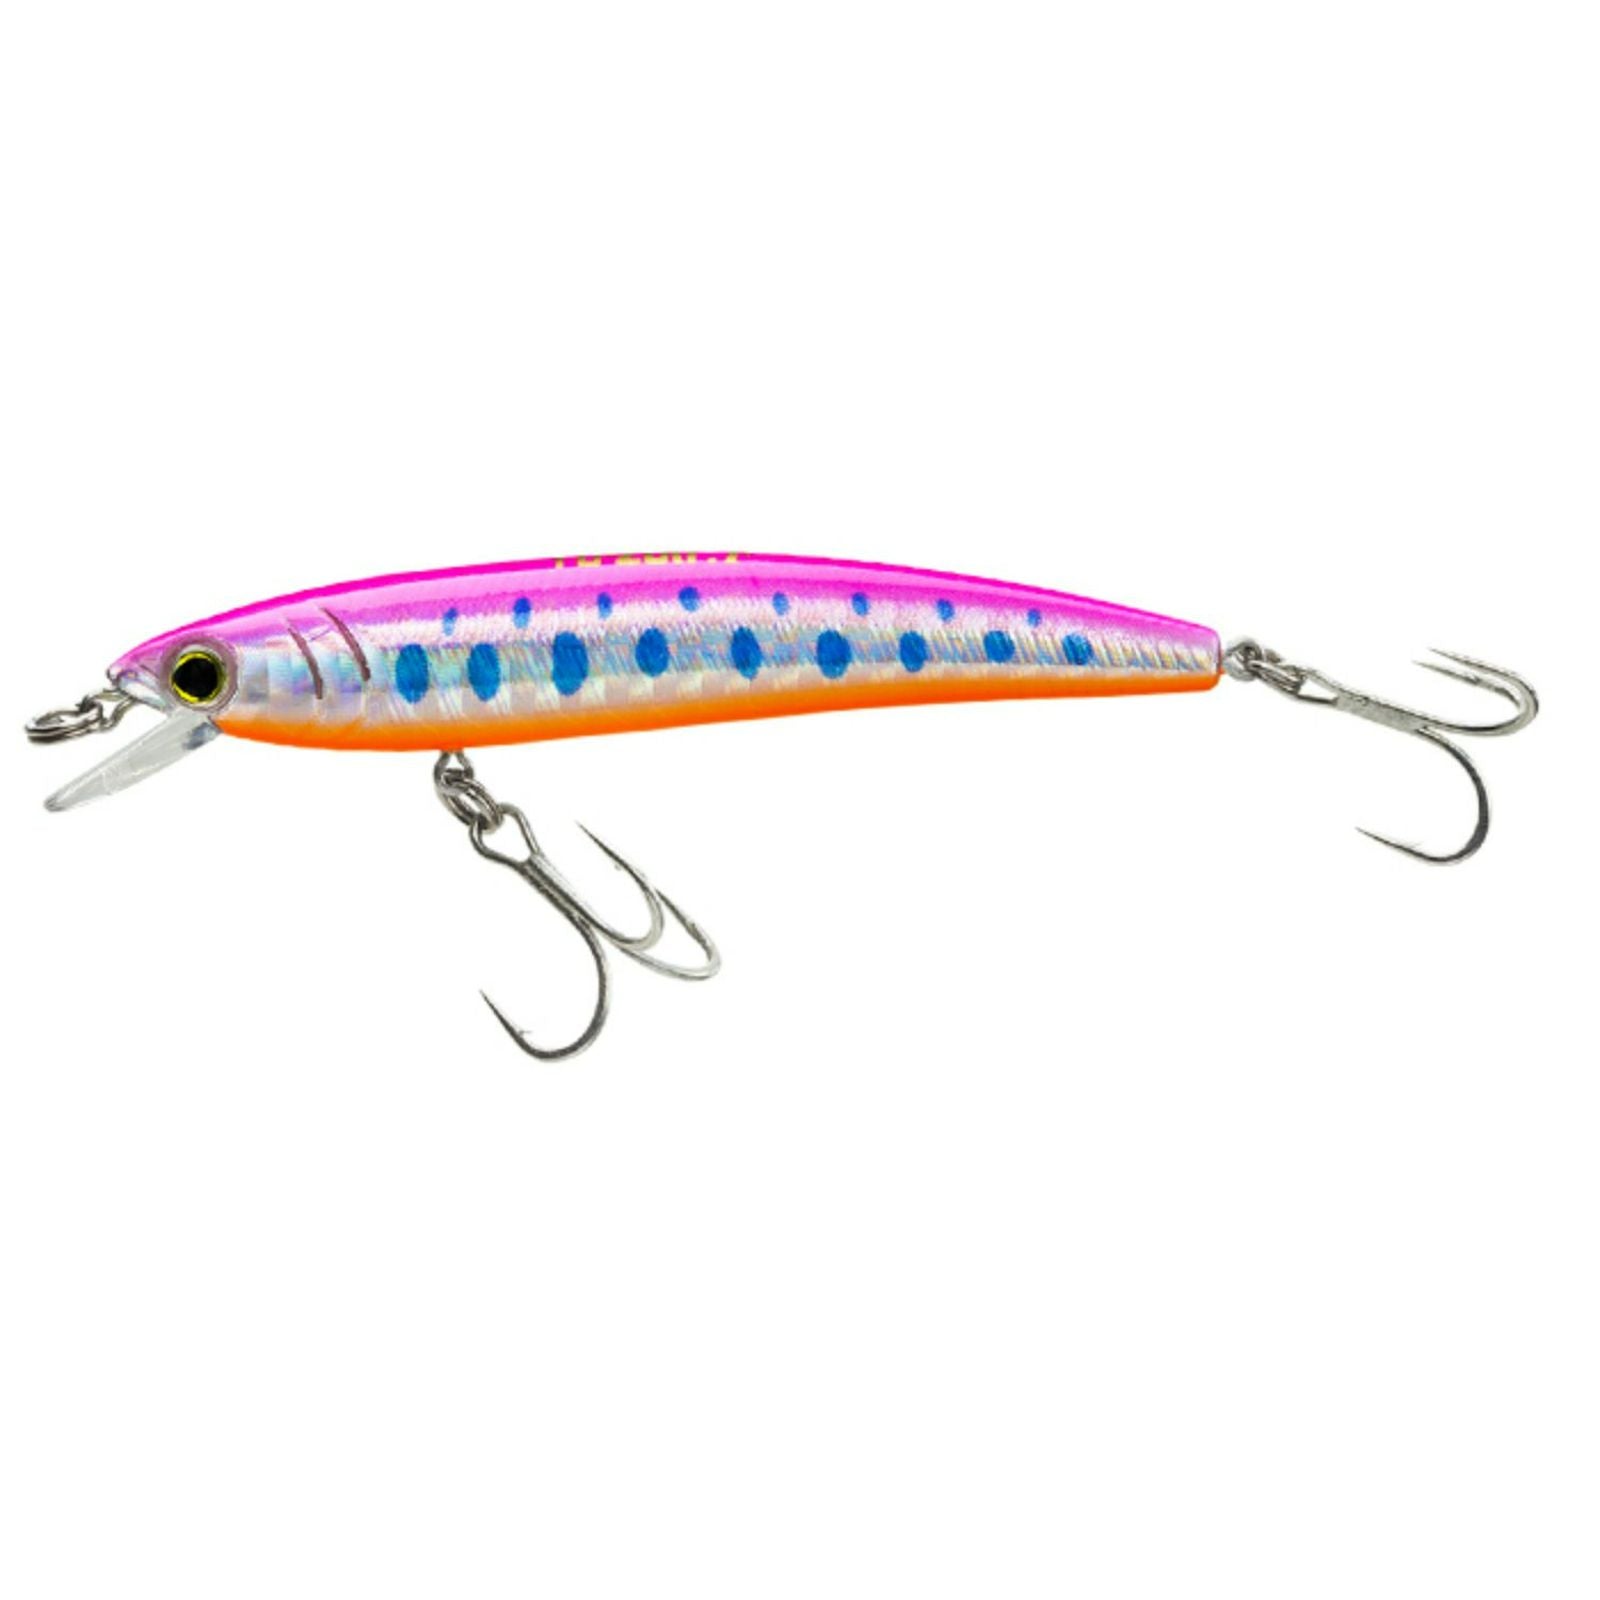 Hot Pink 70mm 2.75inch Yo-Zuri Pins Minnow Floating Trout Lures from Fish  On Outlet